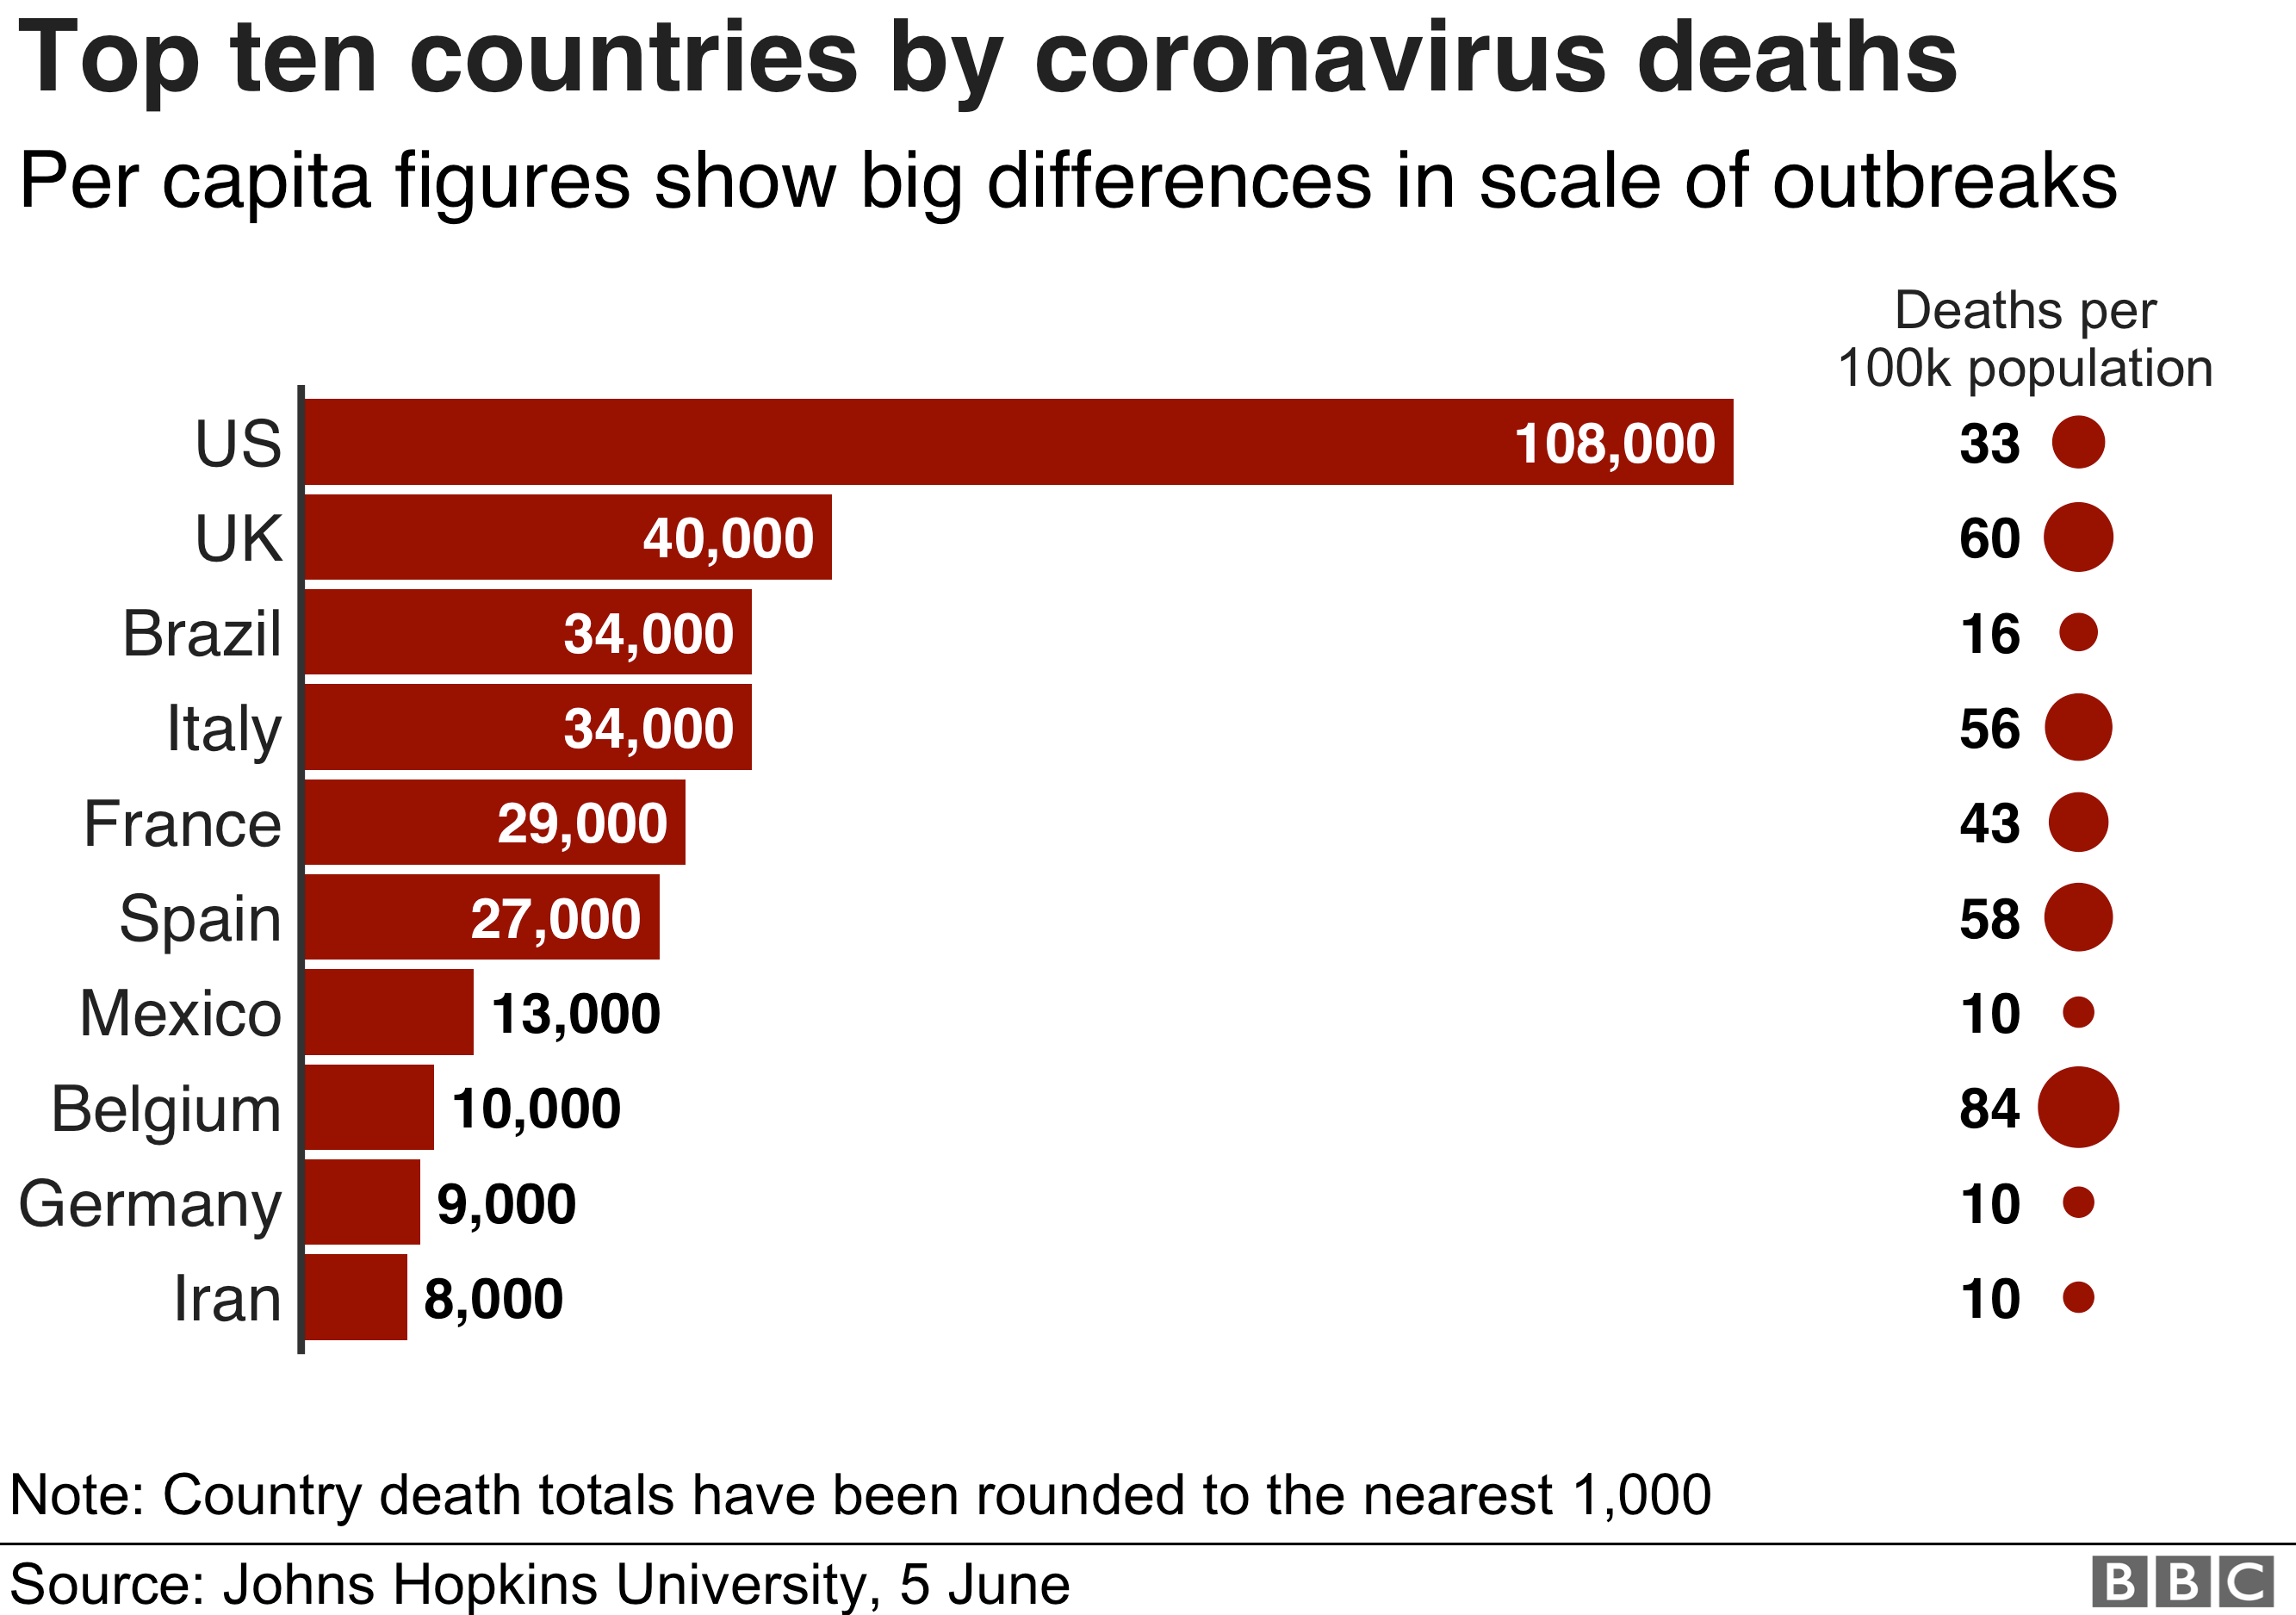 https://ichef.bbci.co.uk/news/624/cpsprodpb/5086/production/_112741602_optimised-world_deaths-nc.png